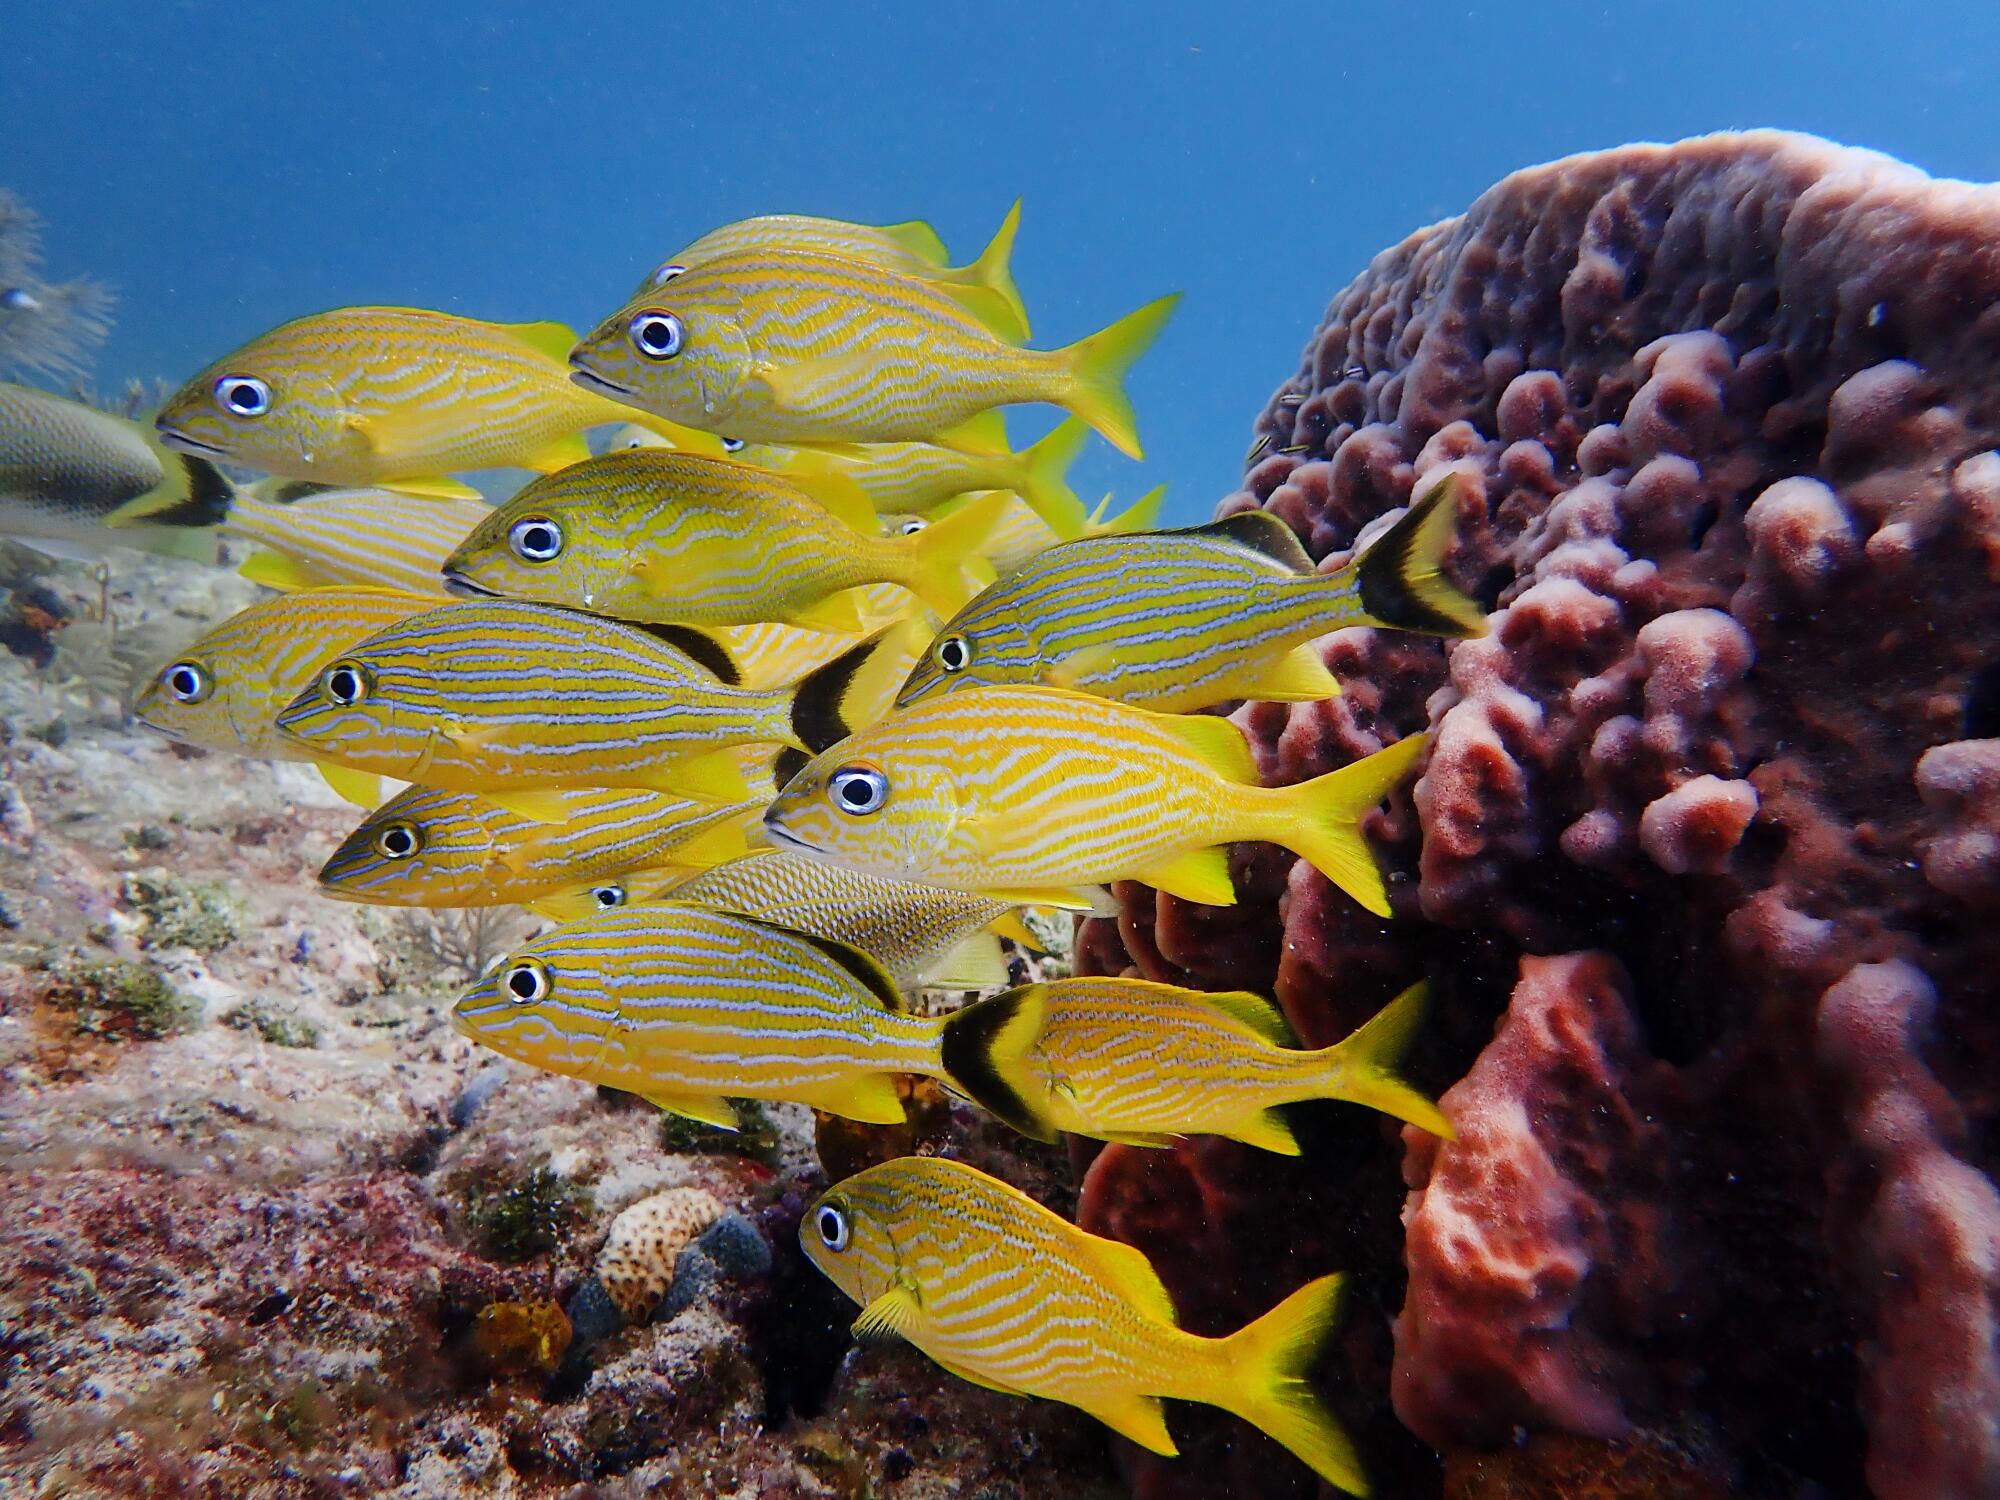 Fish gather beside a sponge coral in the waters off Islamorada in the Florida Keys. 